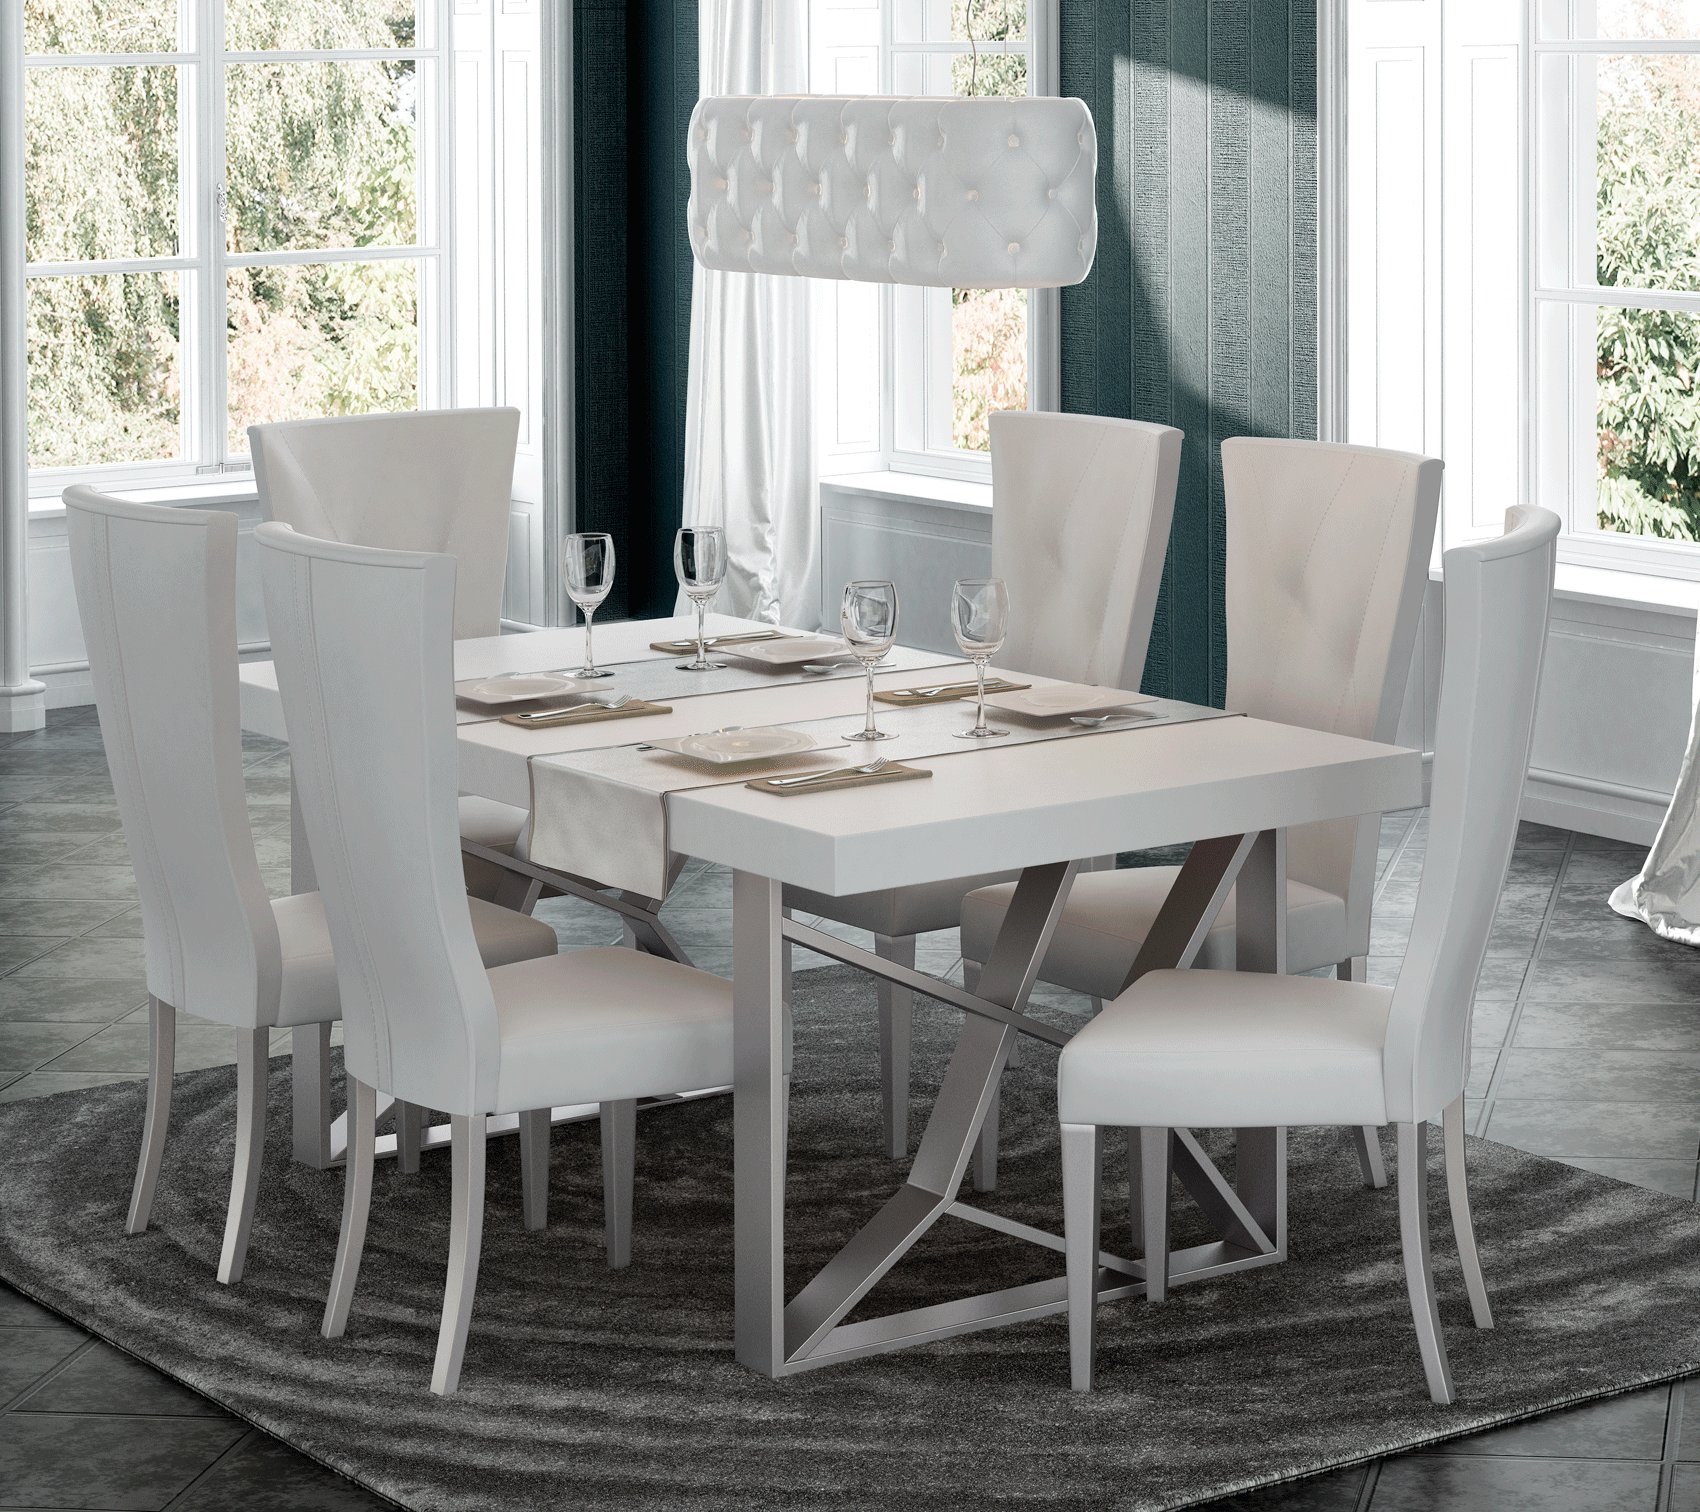 Graceful Rectangular in Wood Leather Designer Modern Dining Room - Click Image to Close